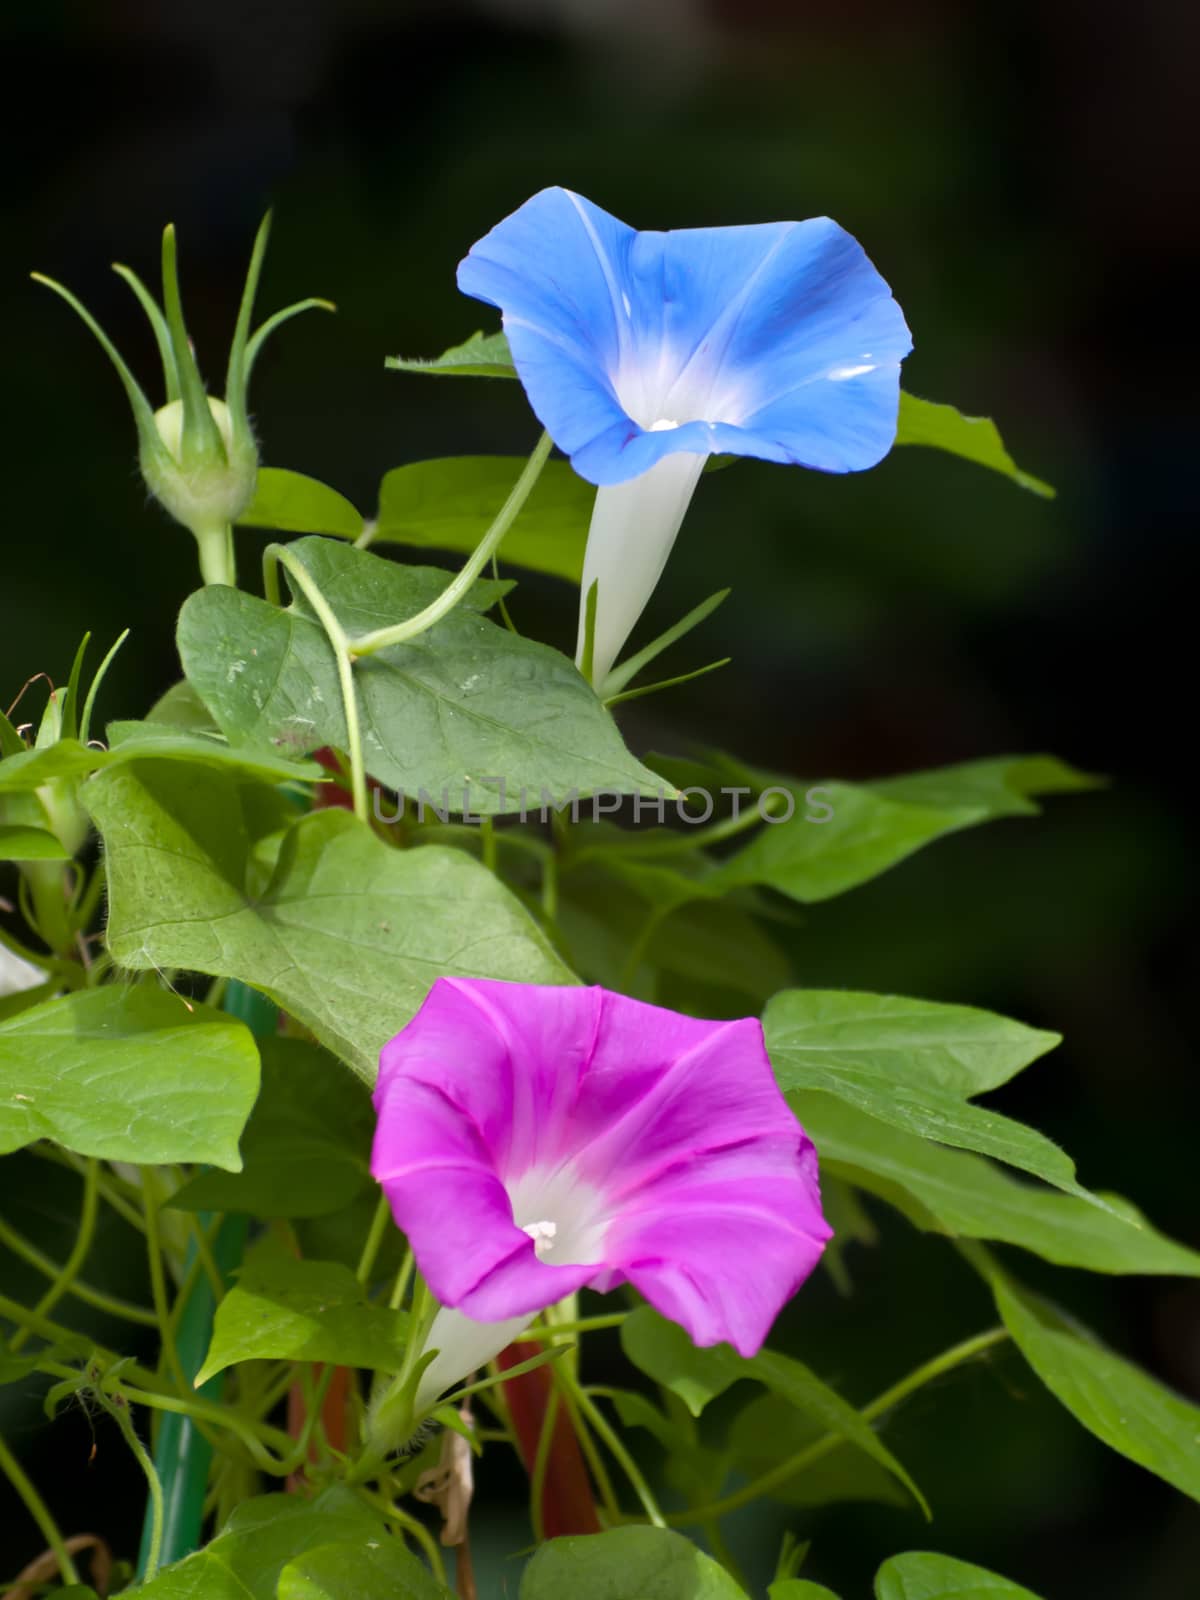 Beautiful pink and blue flower of Morning glory(Ipomoea sp. Family Convolvulaceae), shallow depth of field with blur background.